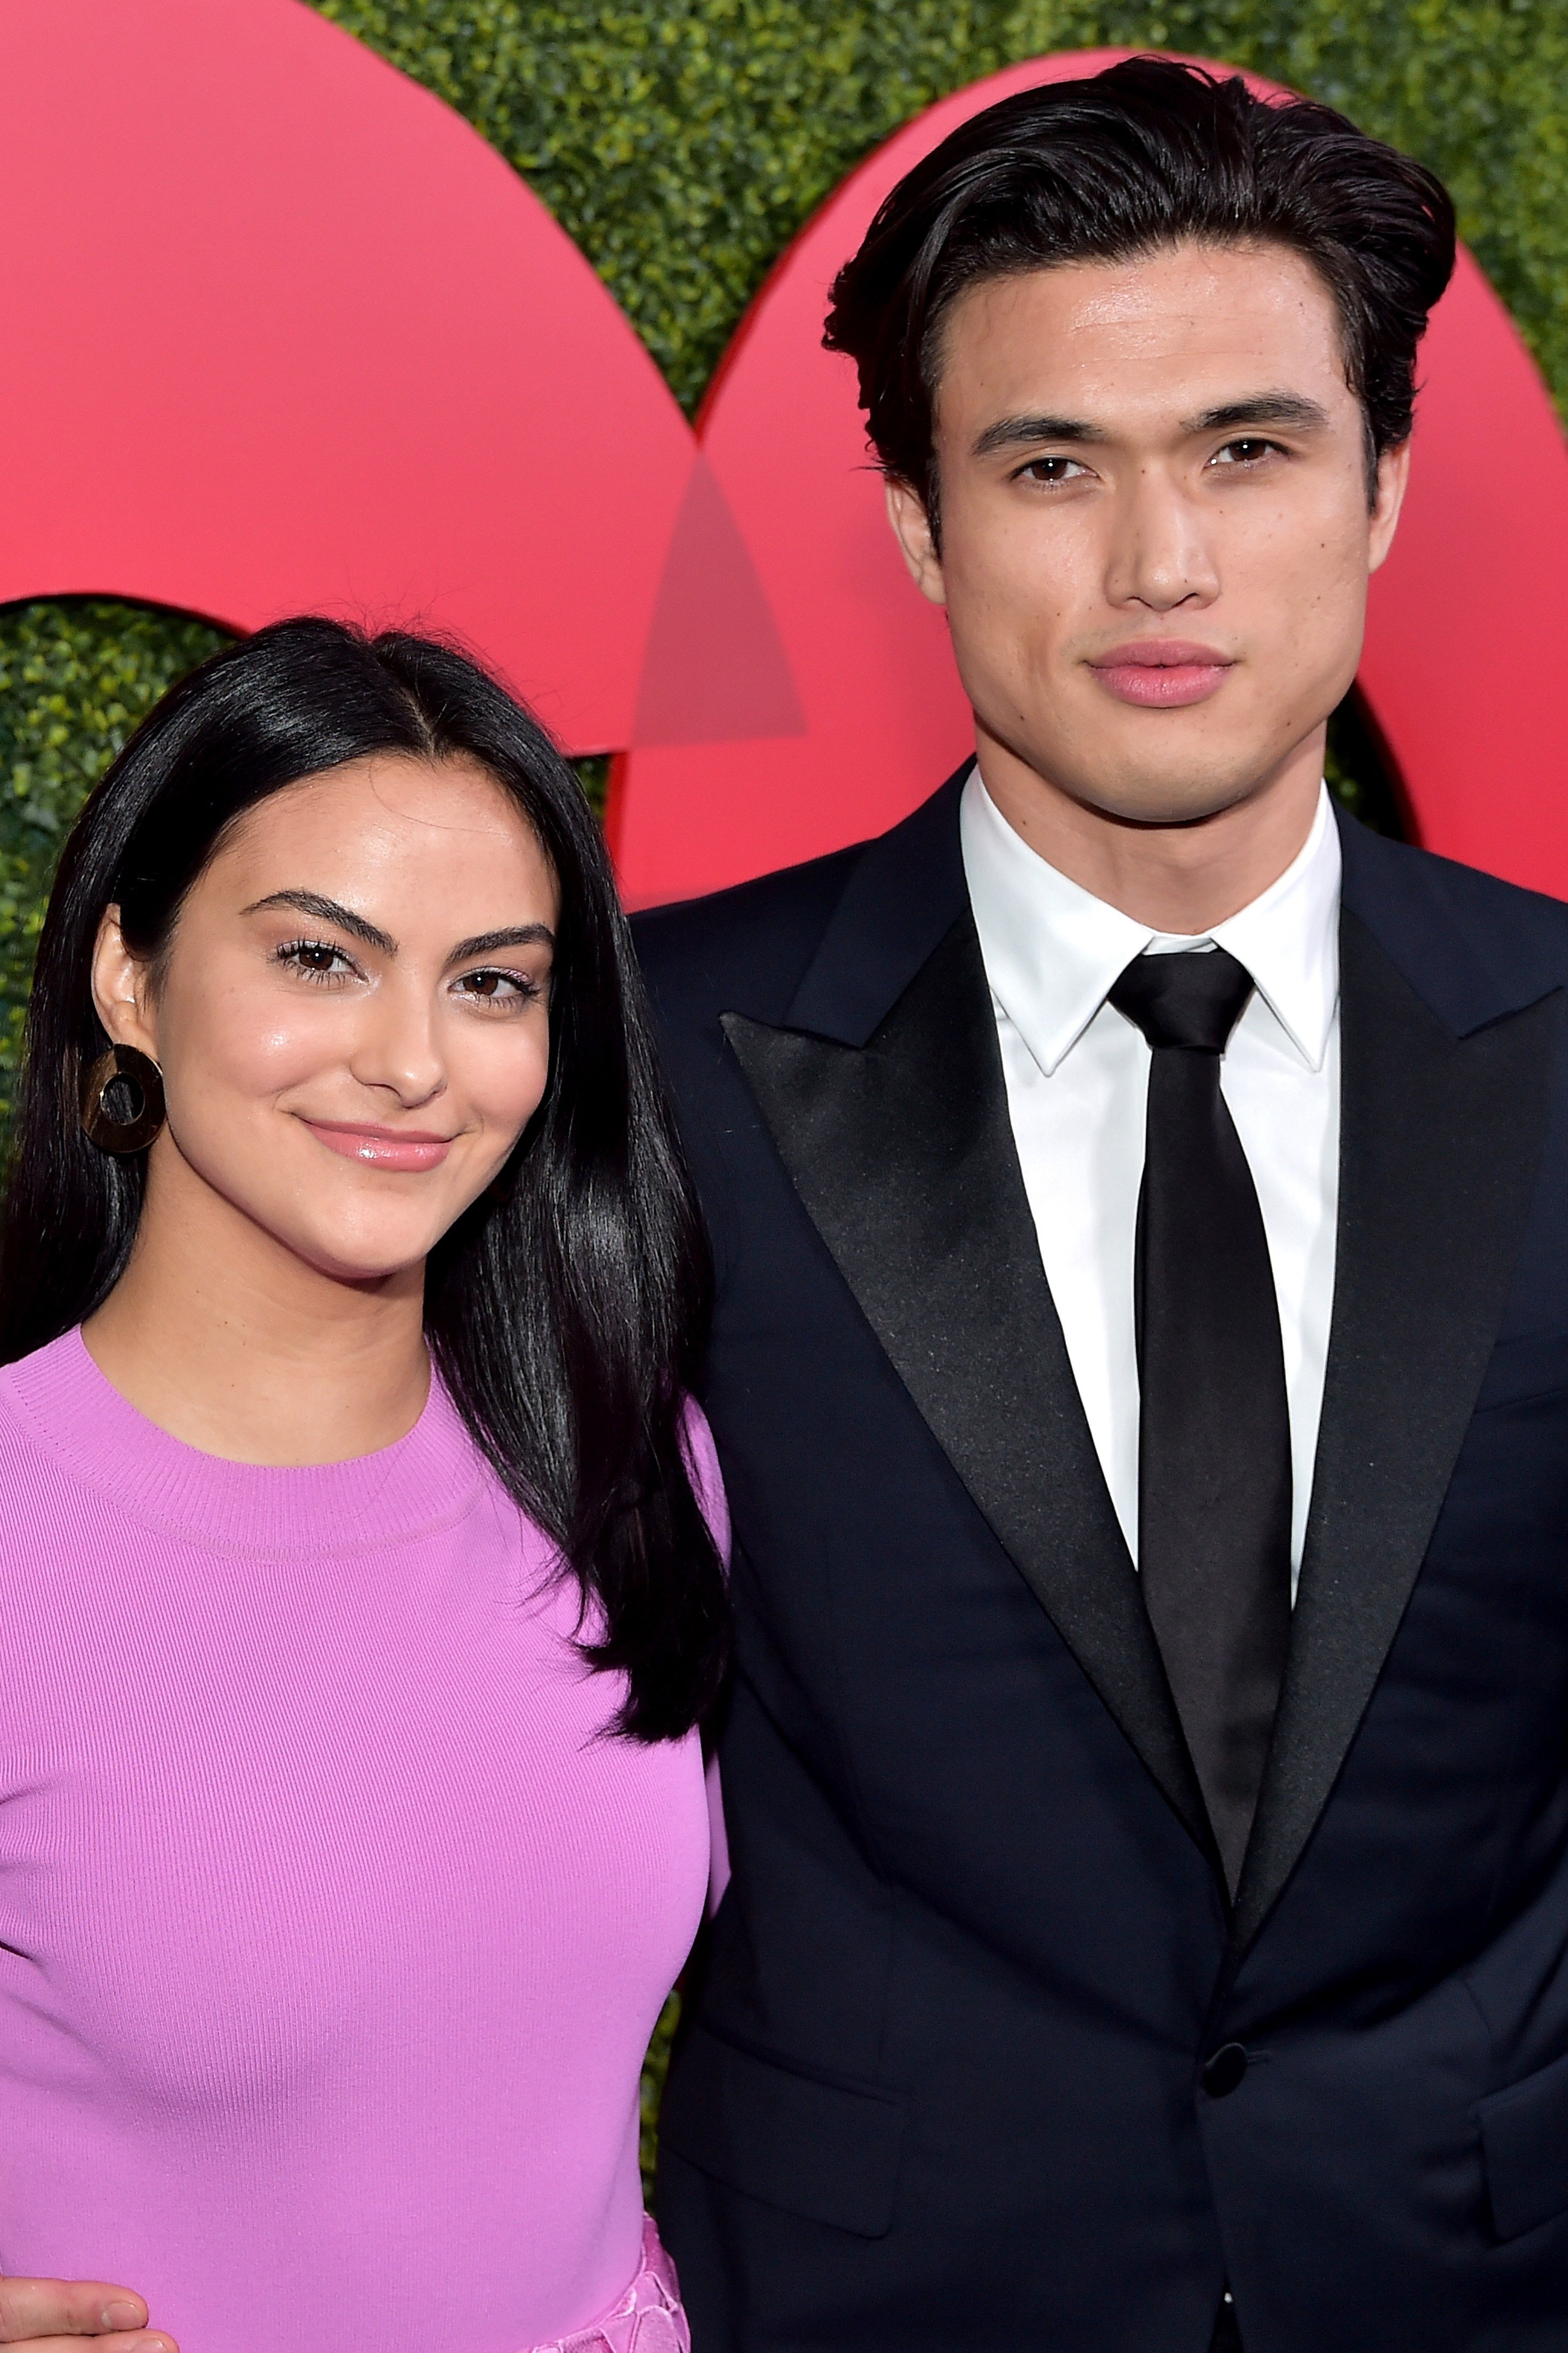 Camila Mendes and Charles Melton Have Reportedly Split Up